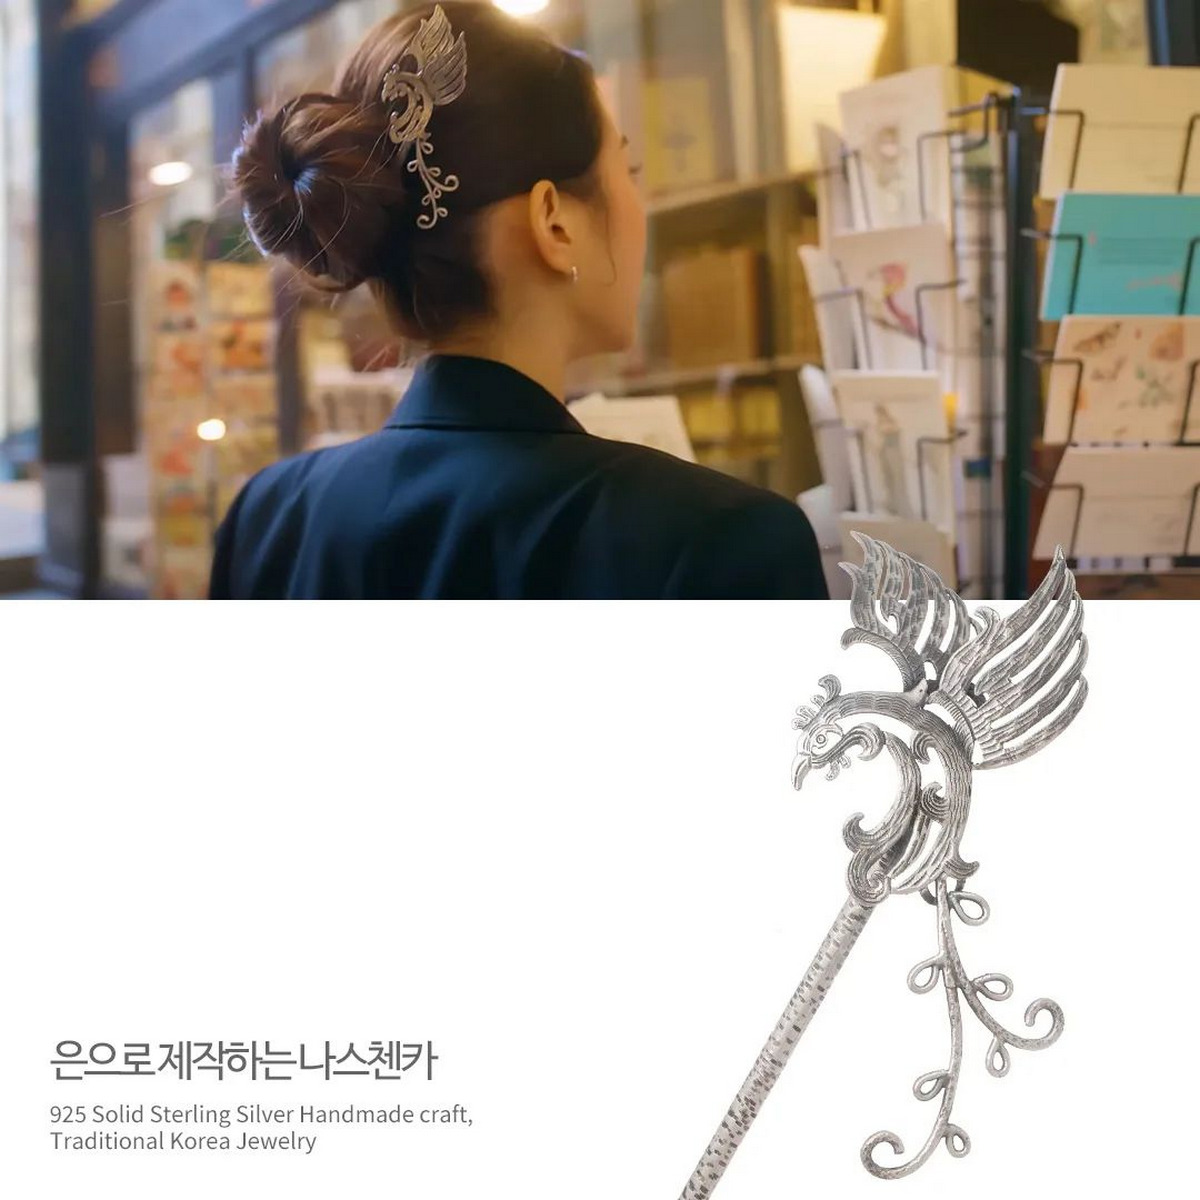 Hair stick for Formal events 